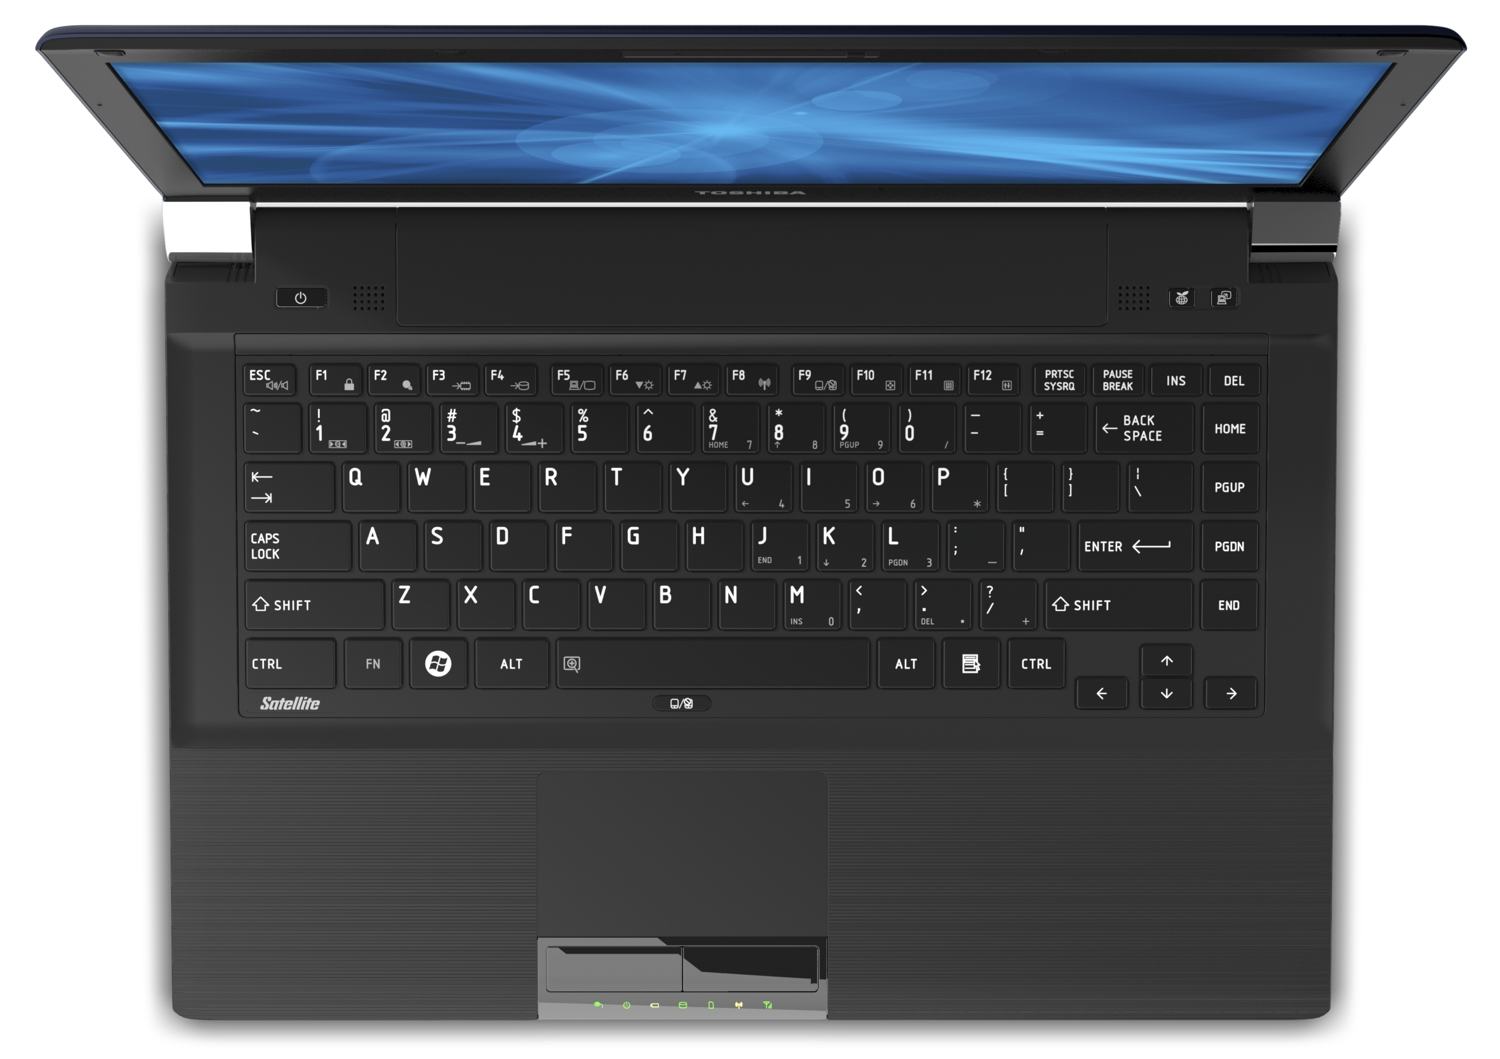 http://thetechjournal.com/wp-content/uploads/images/1202/1330098068-toshiba-satellite-r845s85-140inch-led-laptop-4.jpg